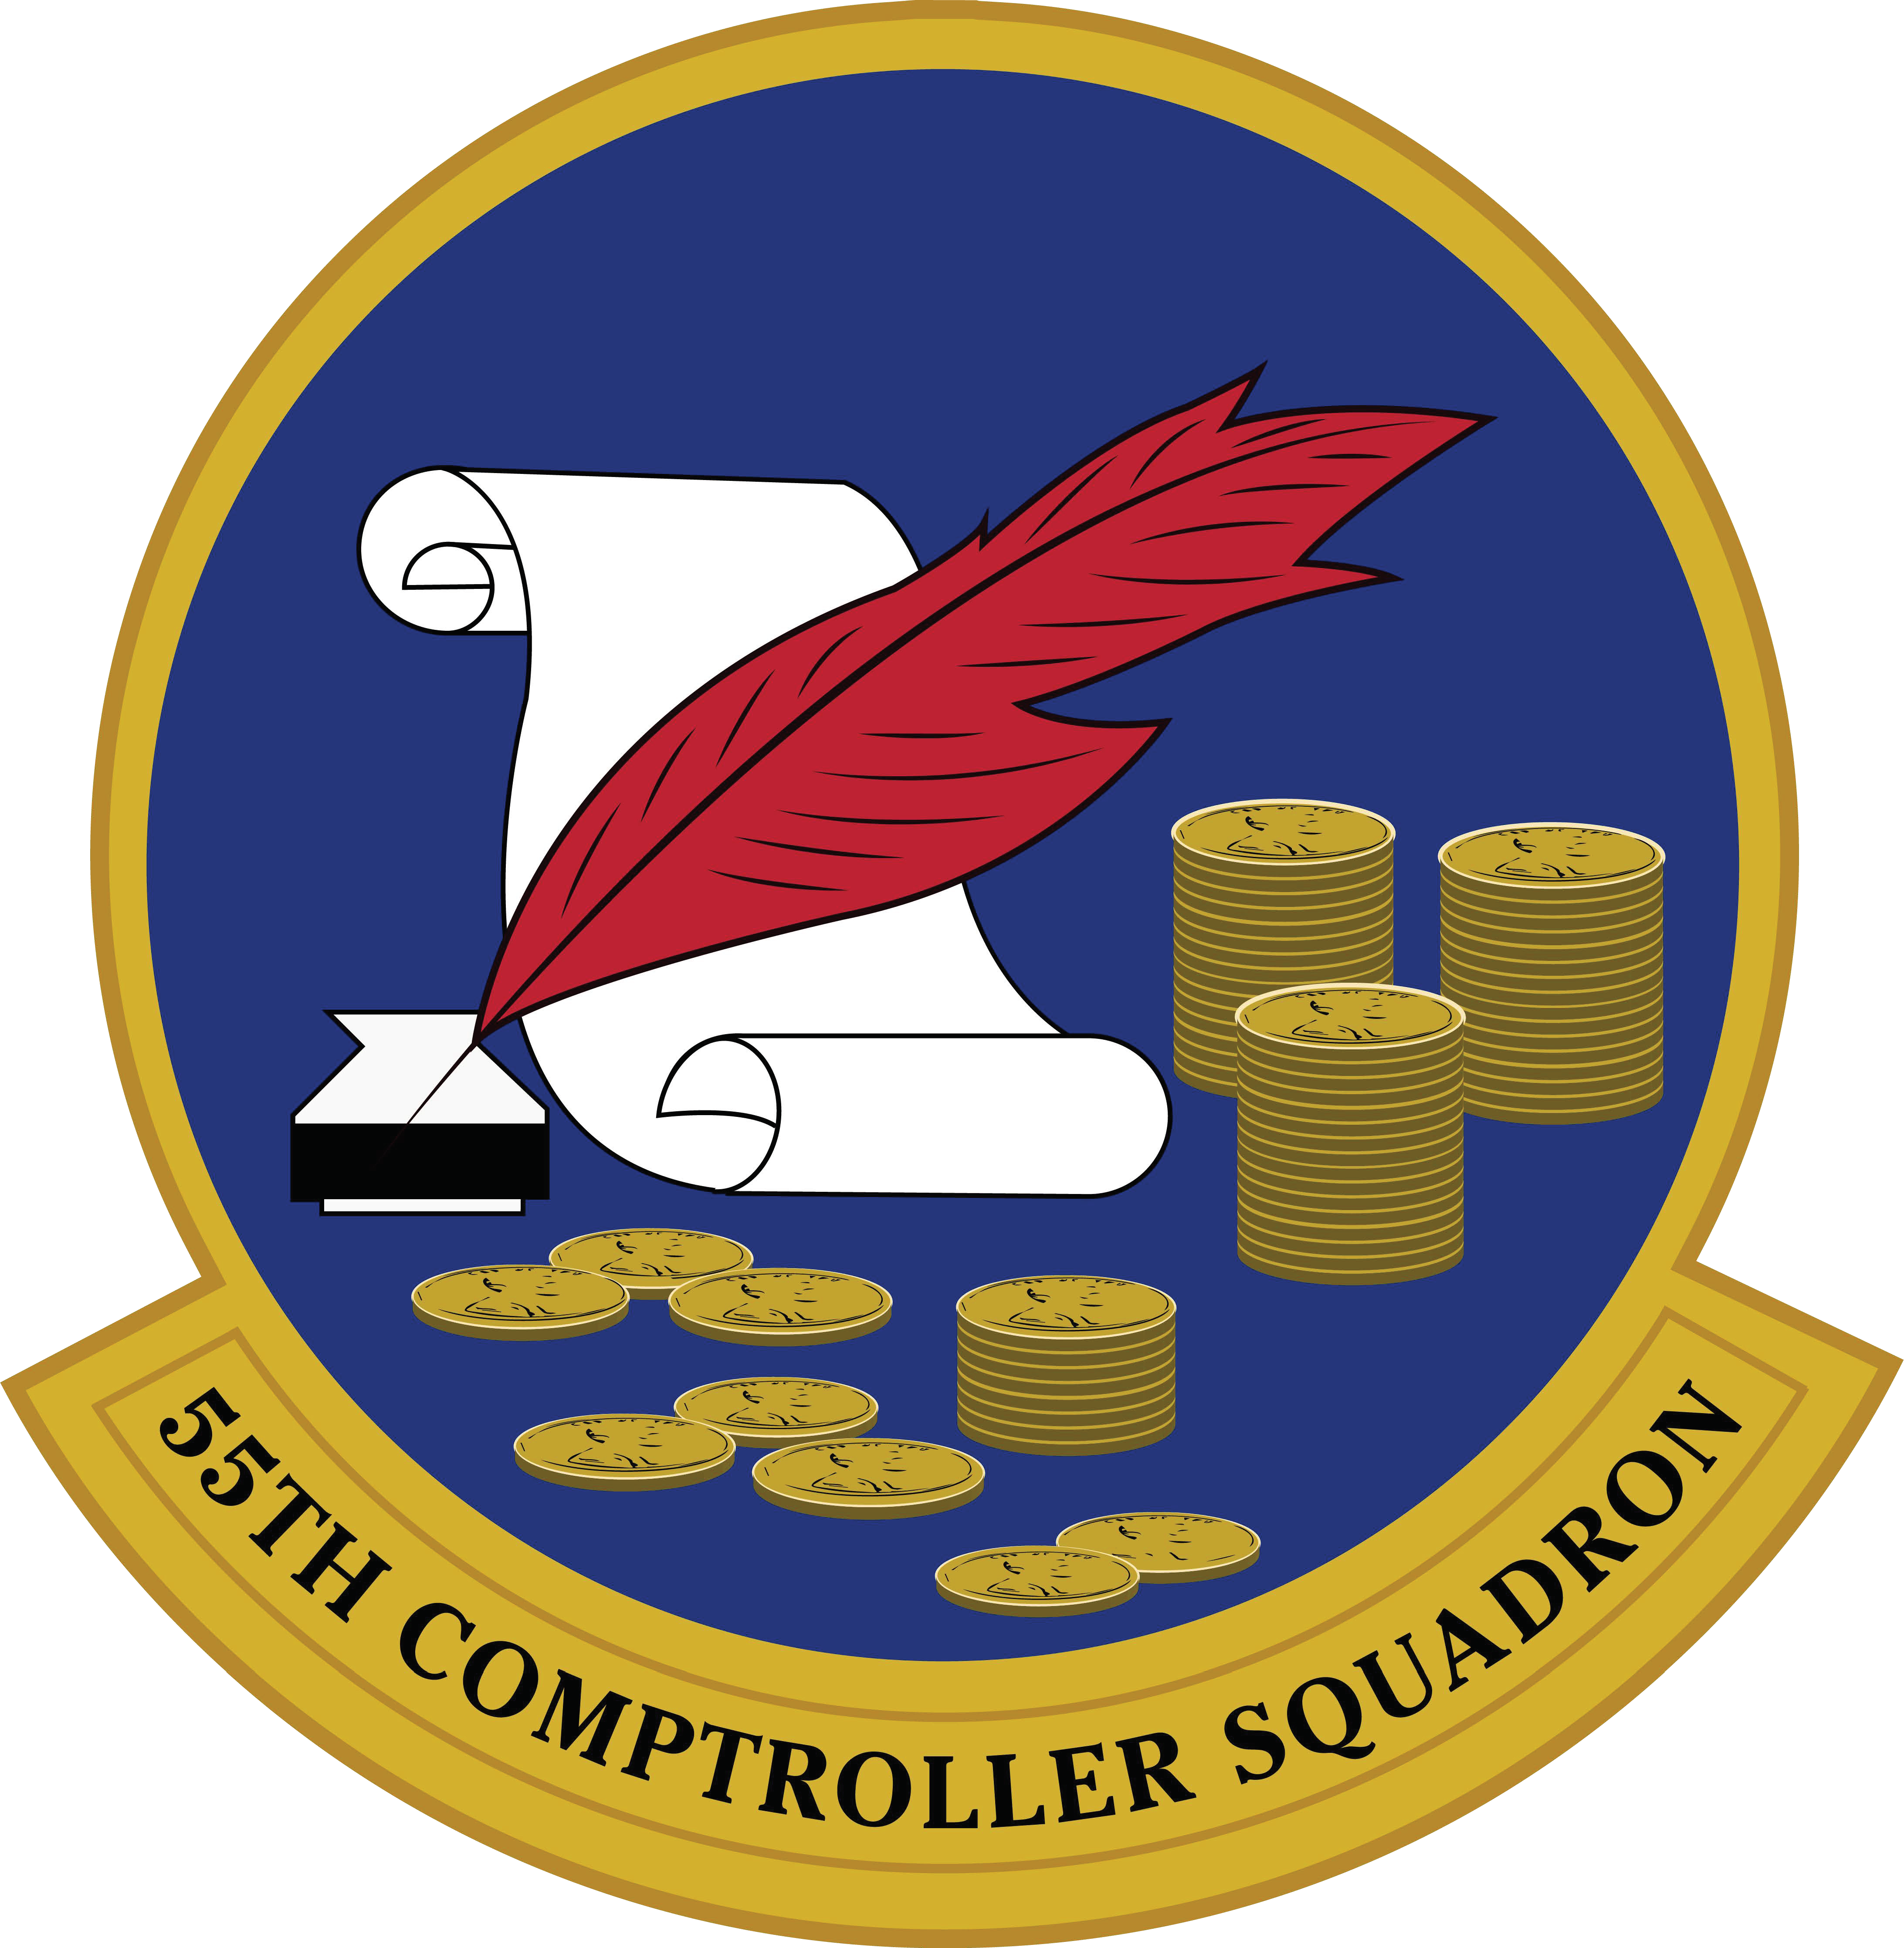 55th Comptroller Squadron emblem - quill and paper and coins